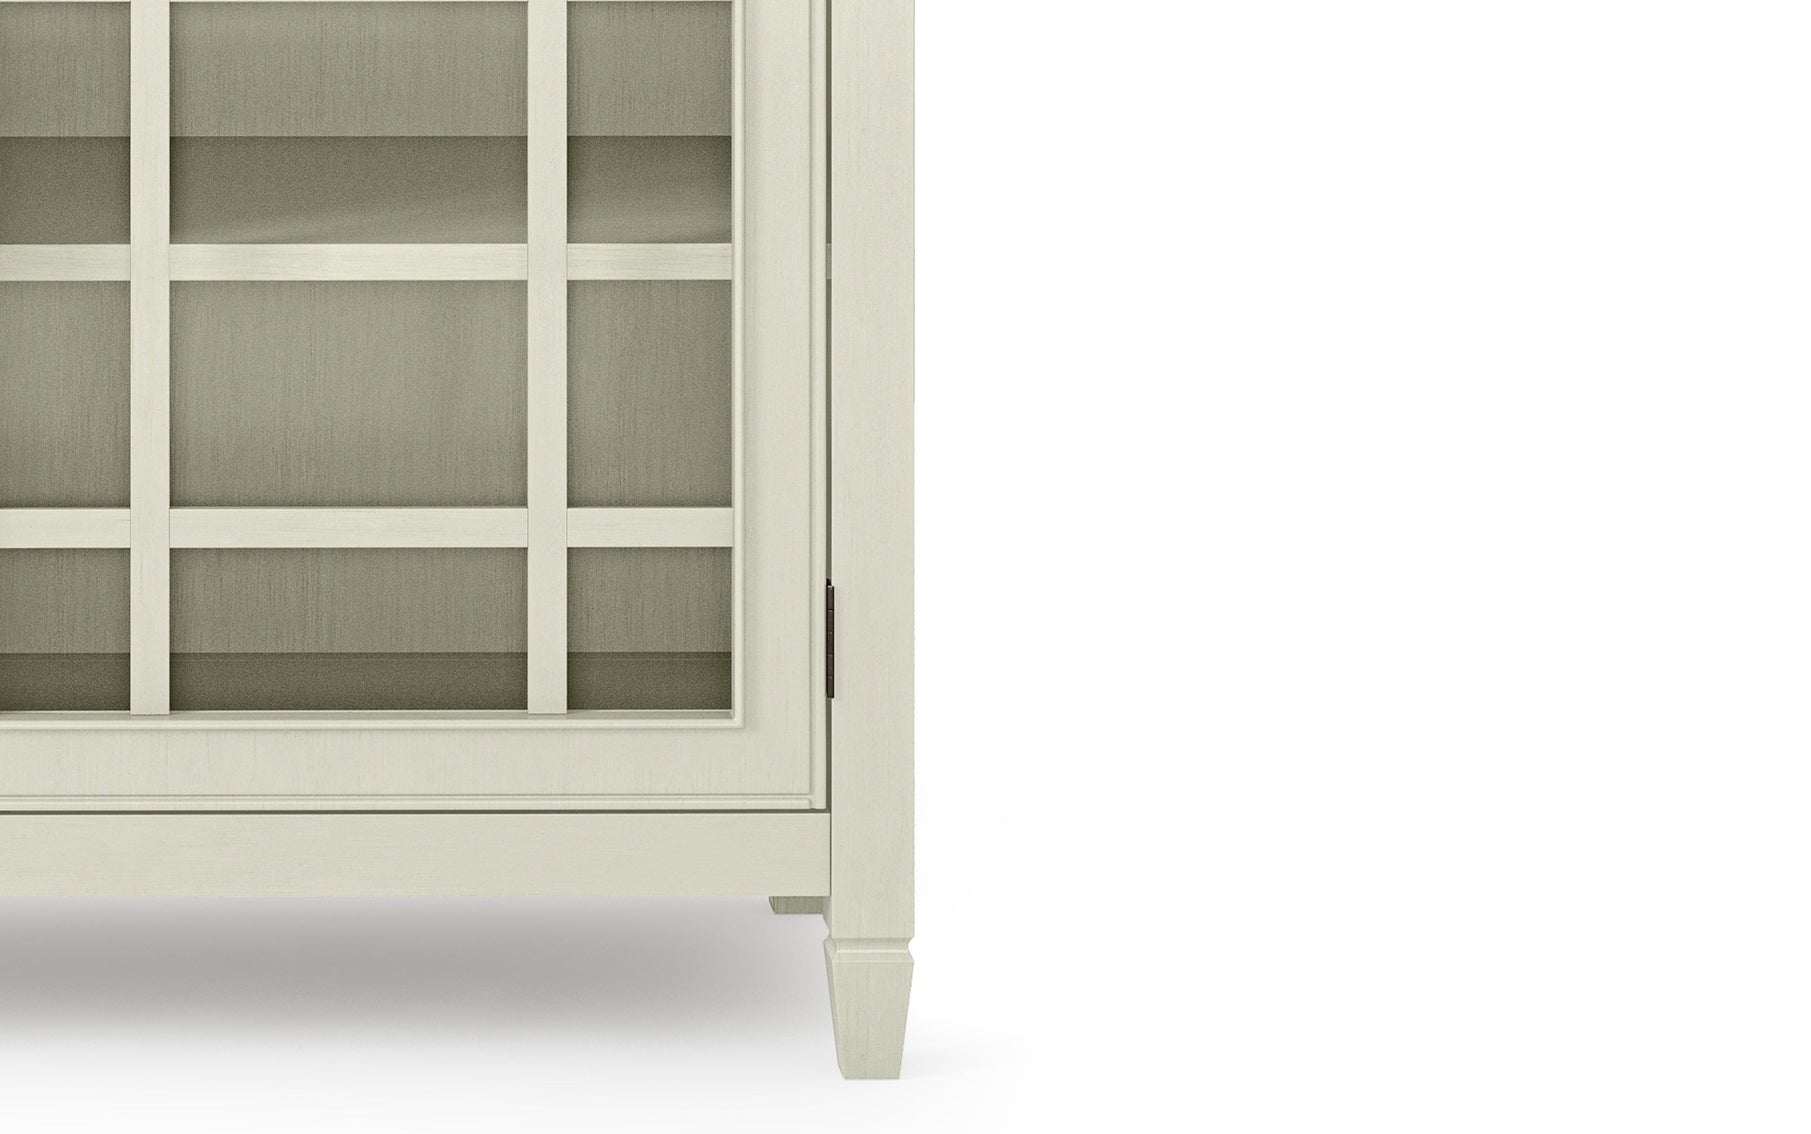 Antique White | Connaught Low Storage Cabinet